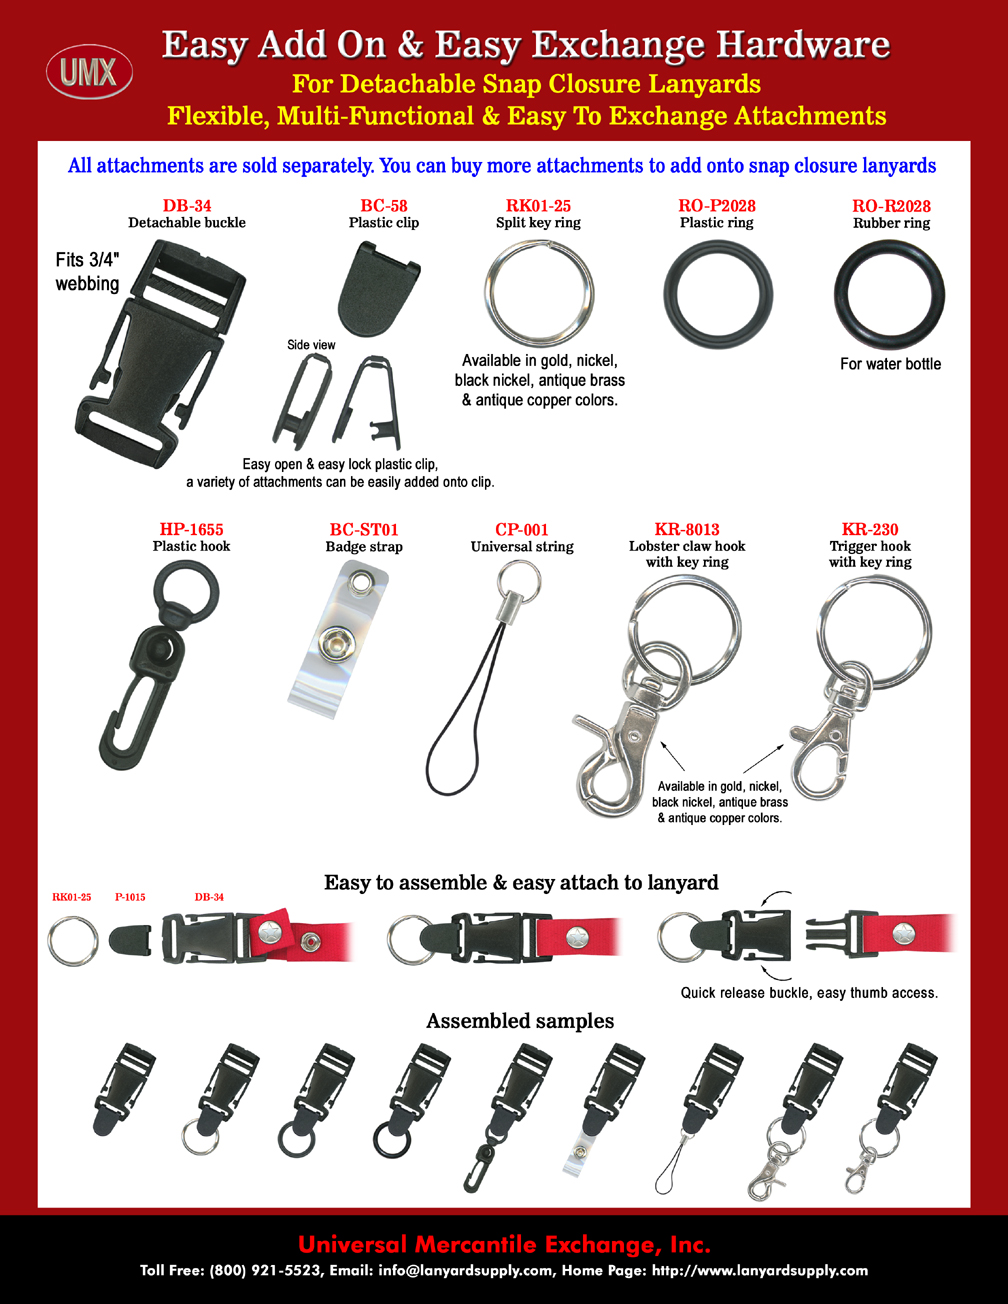 Flexible, Exchangeable and Easy-Add-On Hardware Attachments For 3/4" Quick Release Snap-On Lanyards.